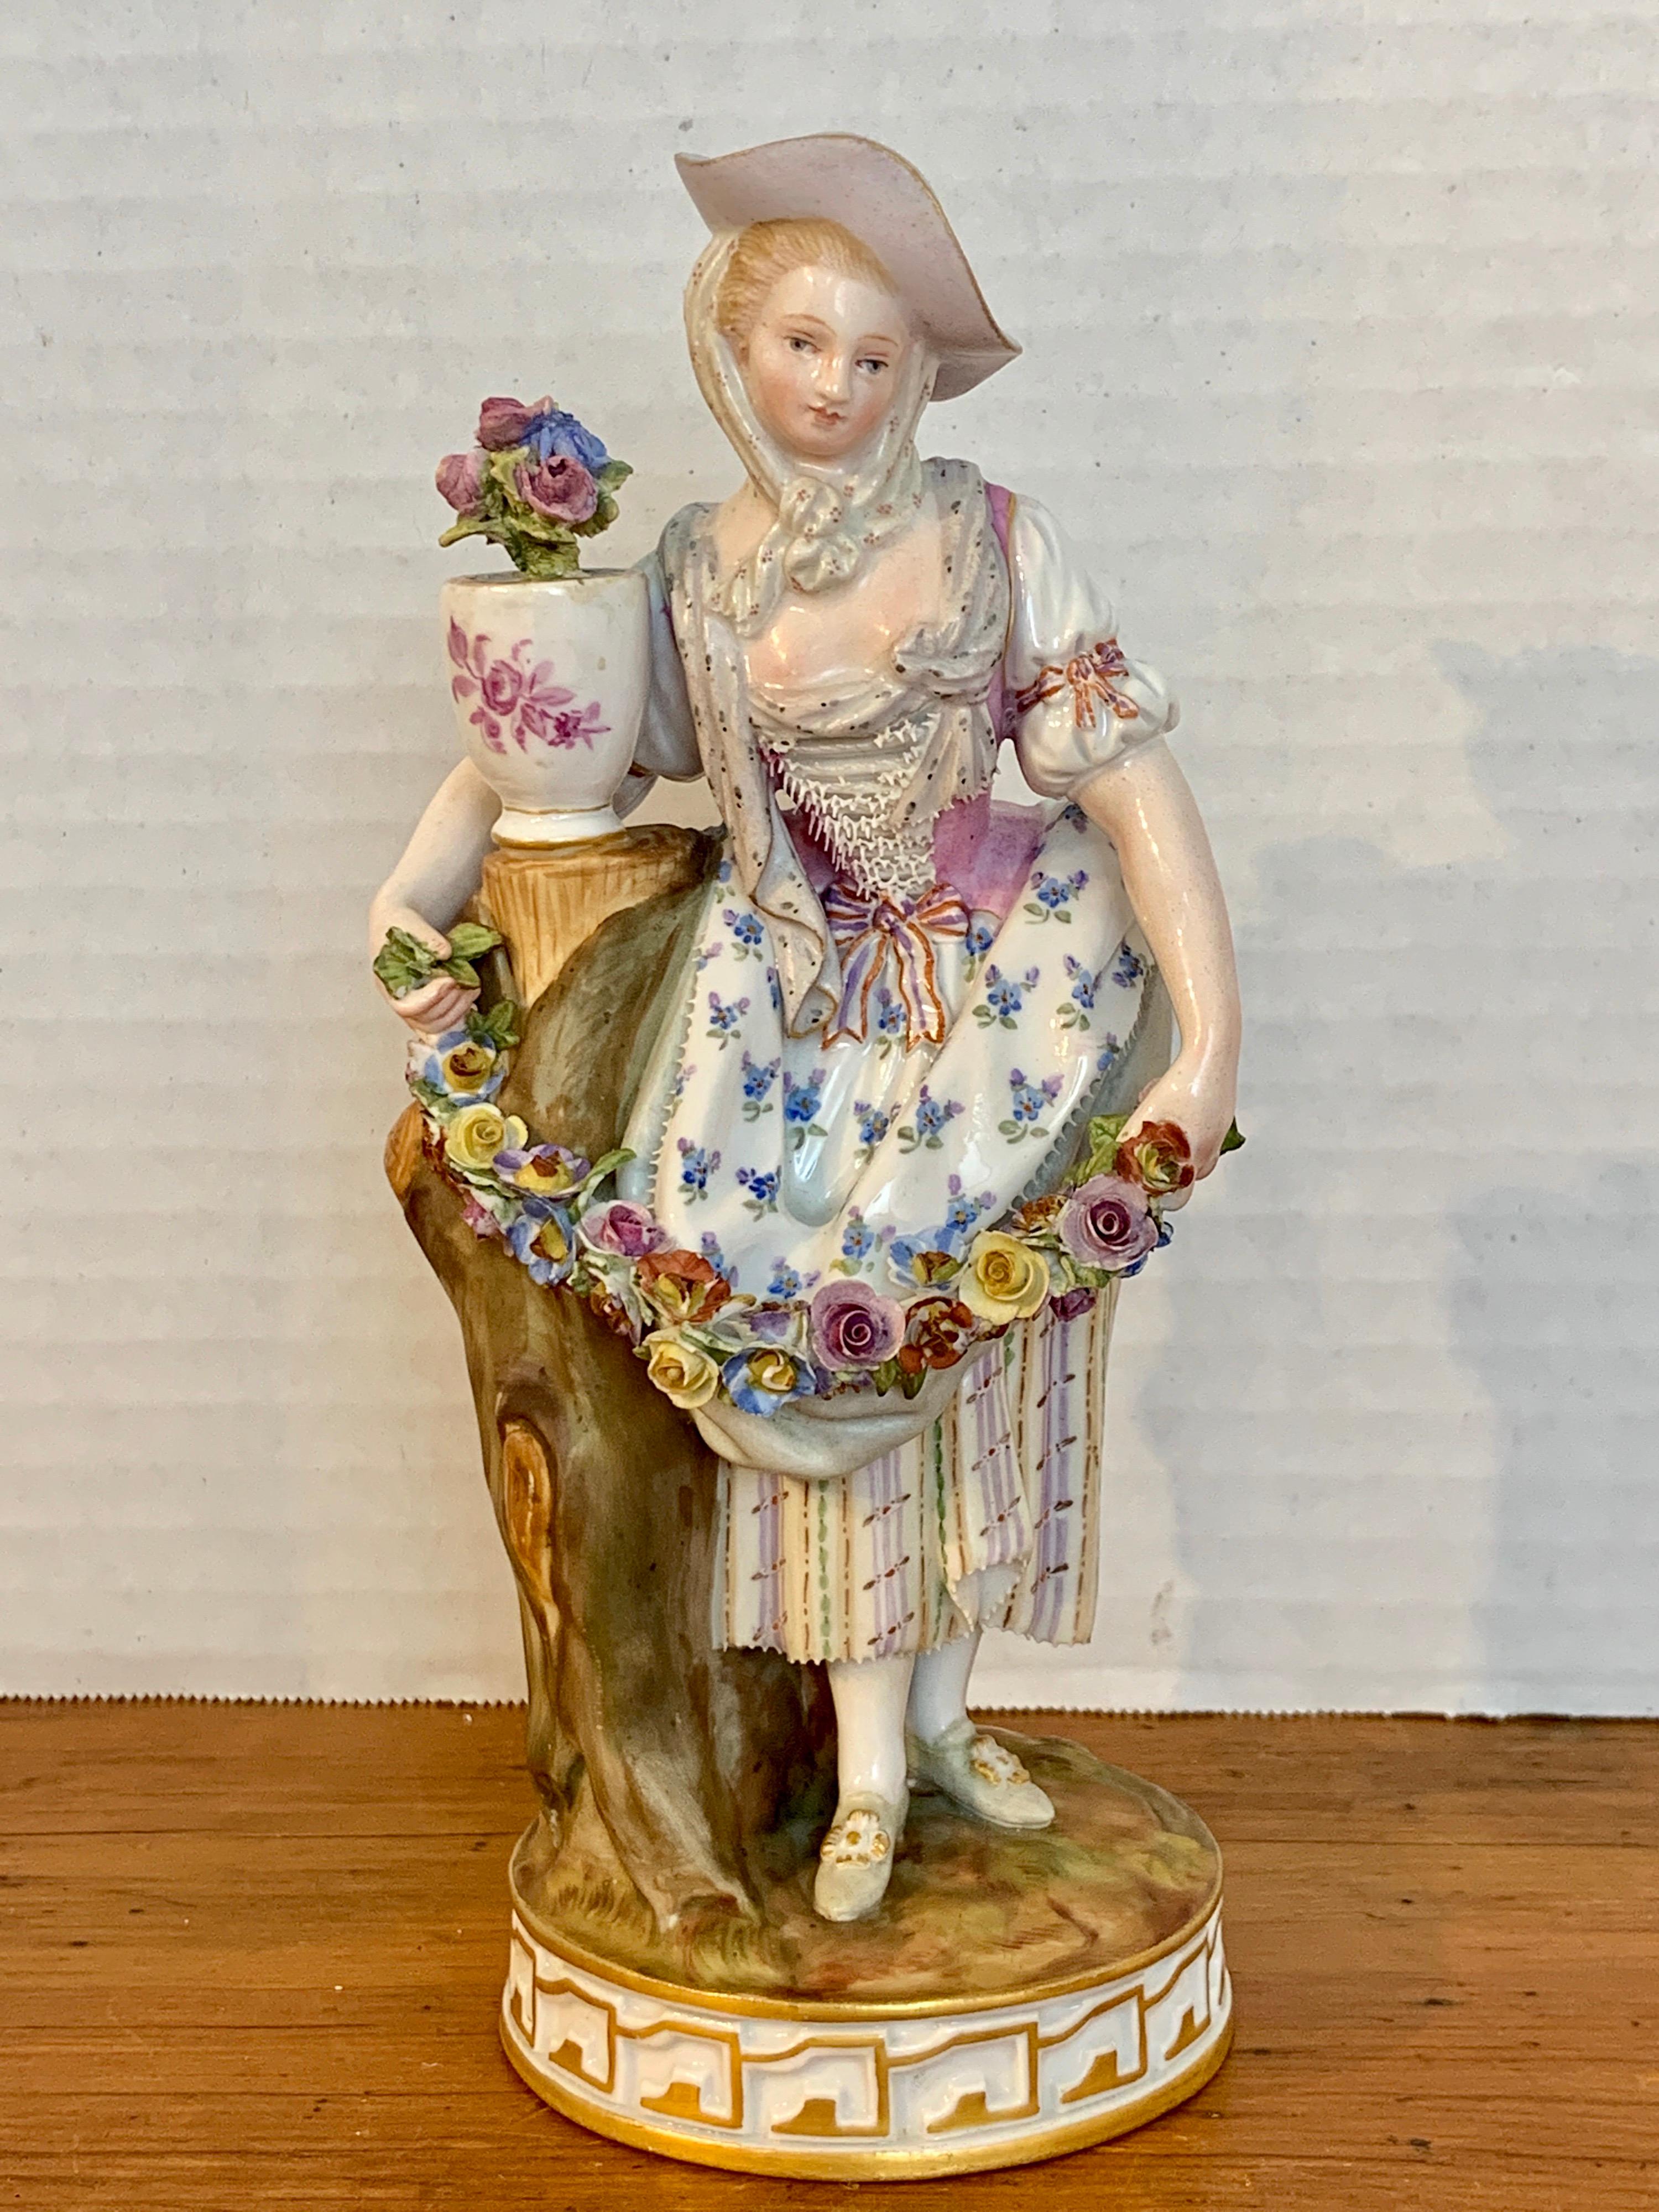 Fine late 19th century Meissen figurine of a Lady Gardener, of typical form with the period dress maiden holding a garland of flowers. Good Antique condition, some minor losses on the flowers and leaves, all expected wear.

 